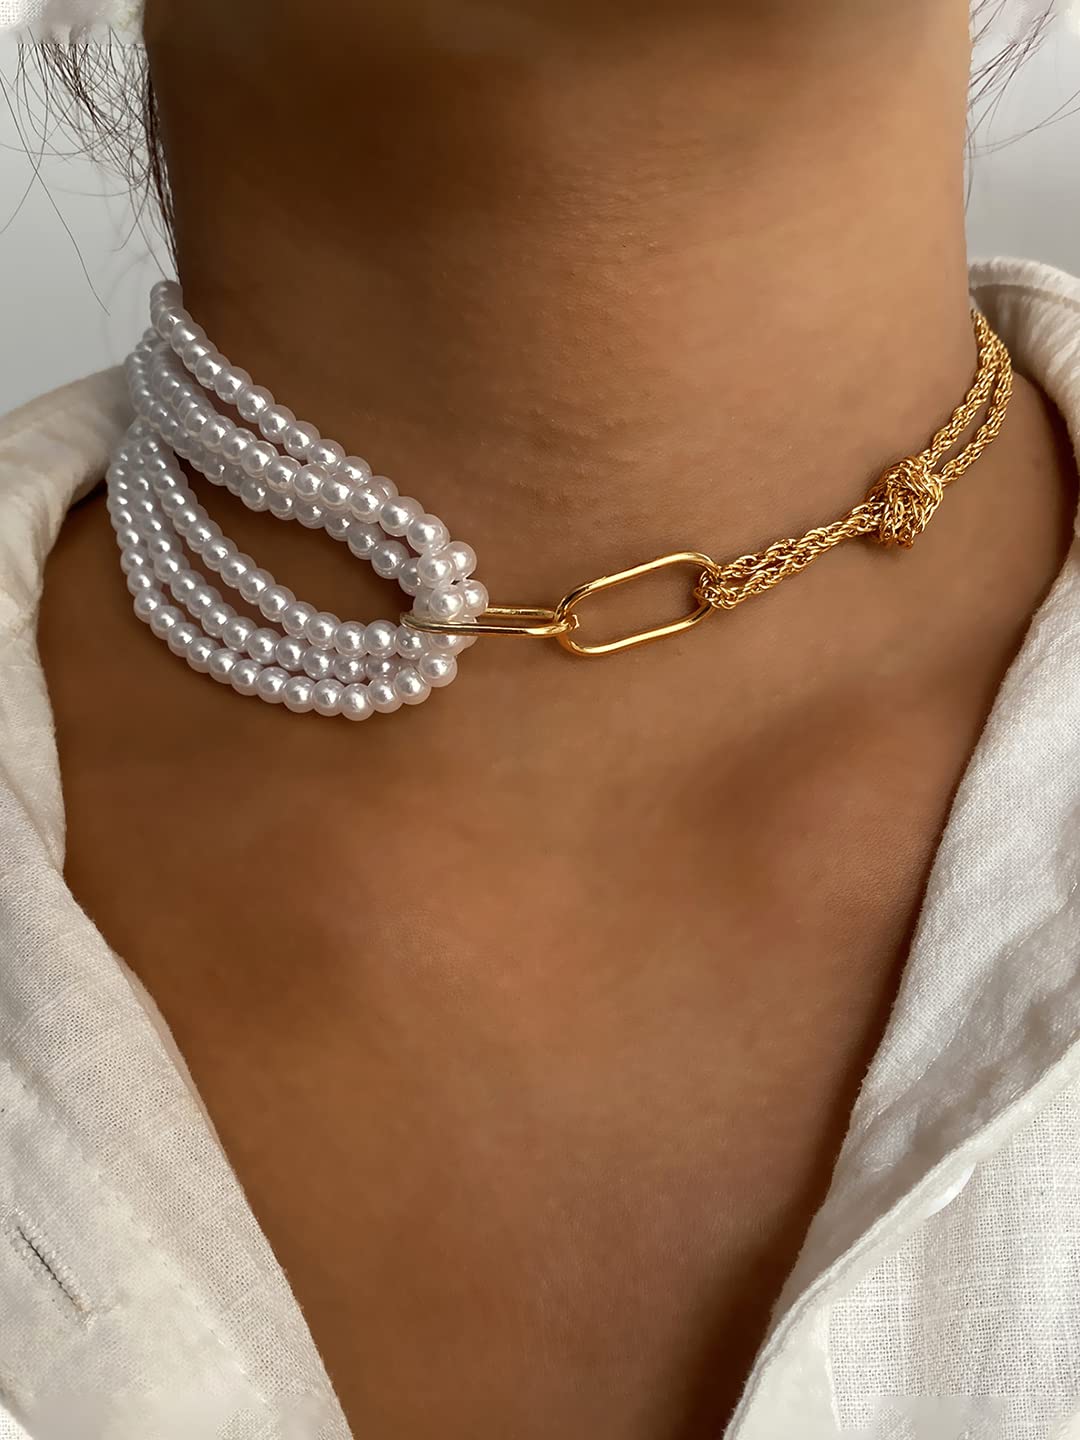 Yellow Chimes Necklace for Women and Girls Pearl Necklace for Women | Gold Plated Multilayered Choker Set of 2Pcs Necklace for Girls | Birthday Gift for girls and women Anniversary Gift for Wife